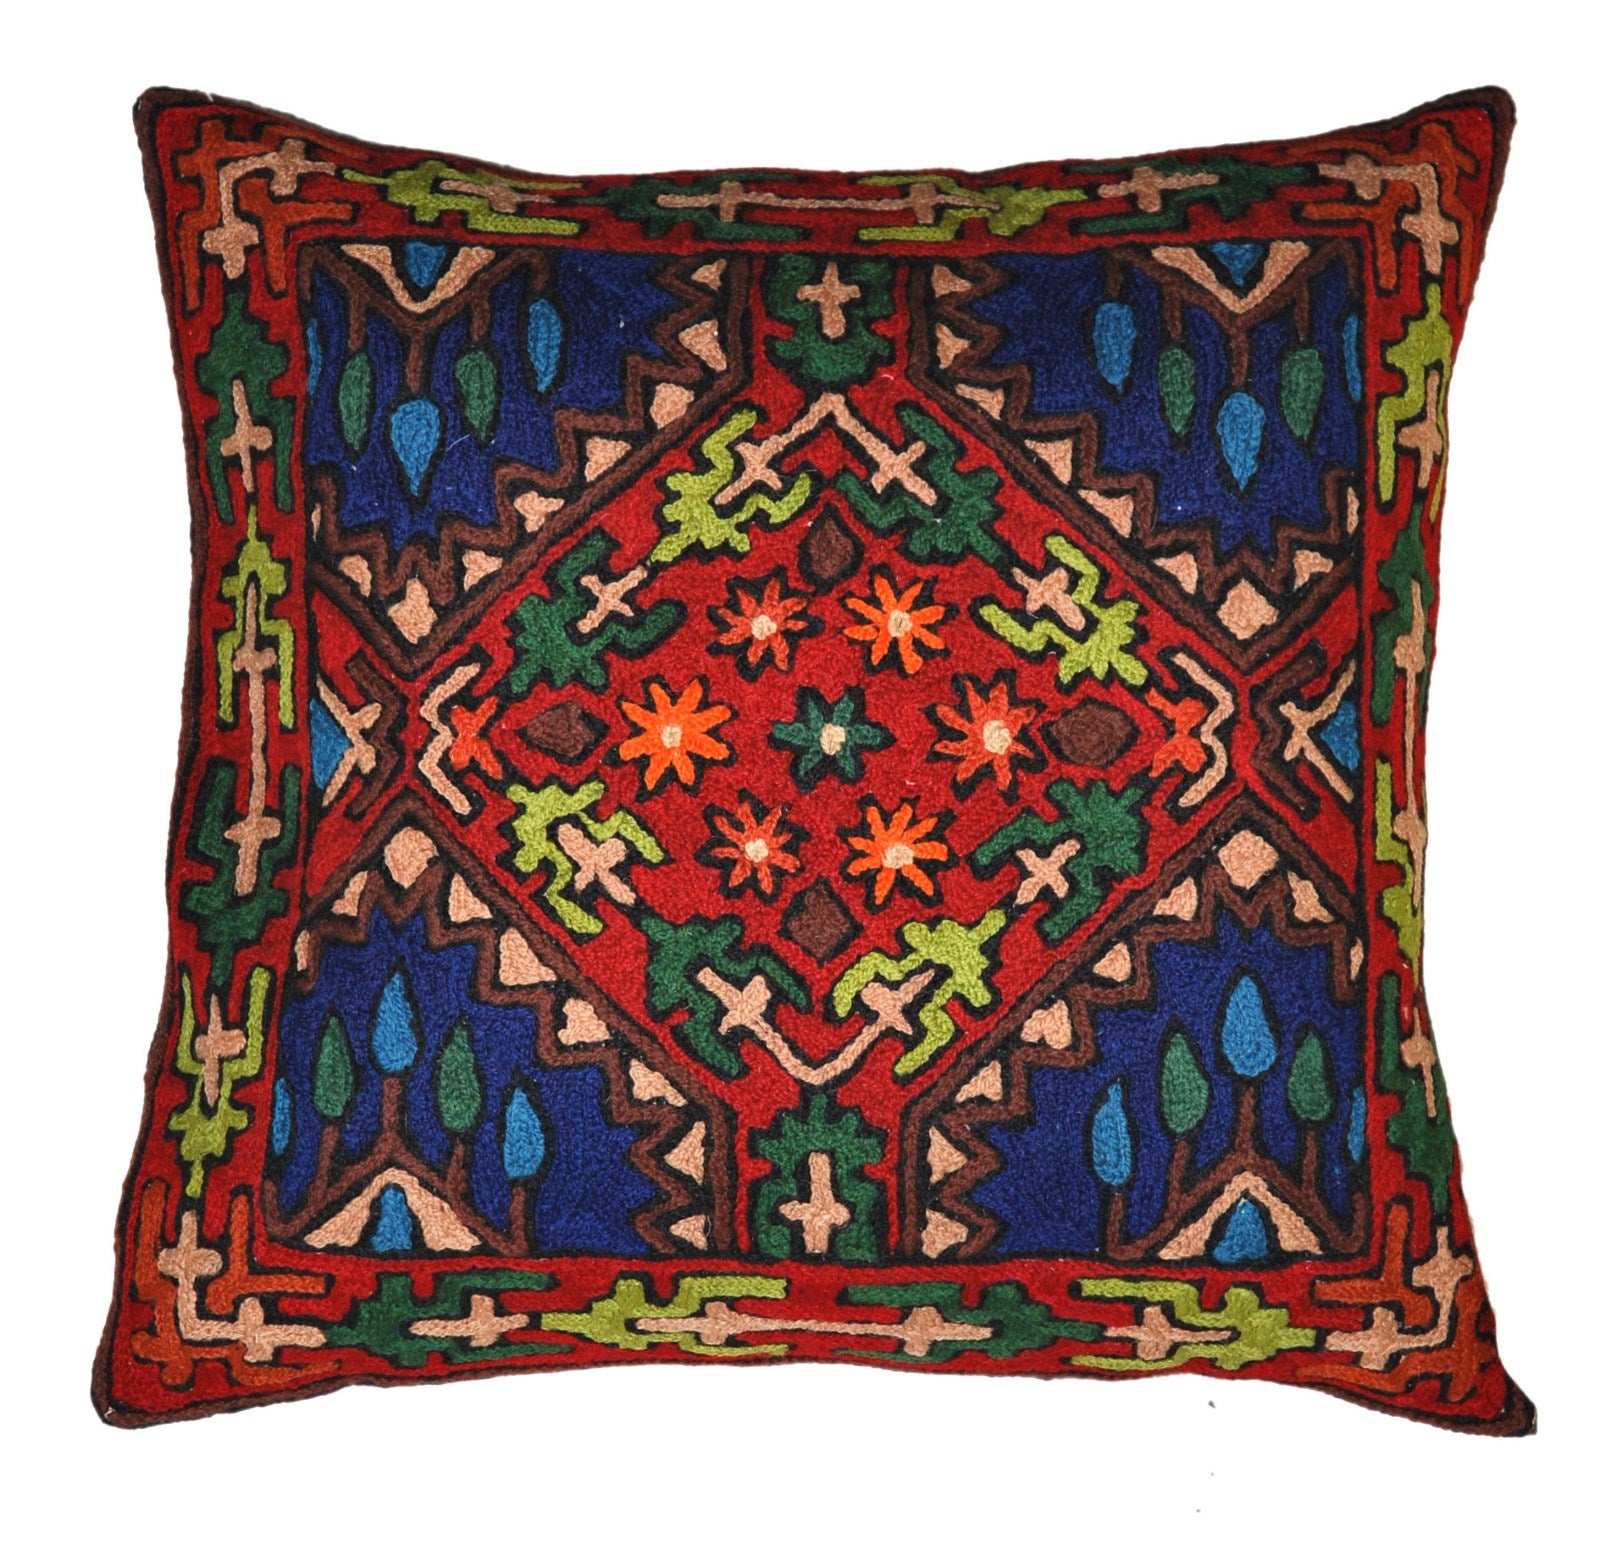 Crewel Wool Embroidered Cushion Throw Pillow Cover, Multicolor #CW1009